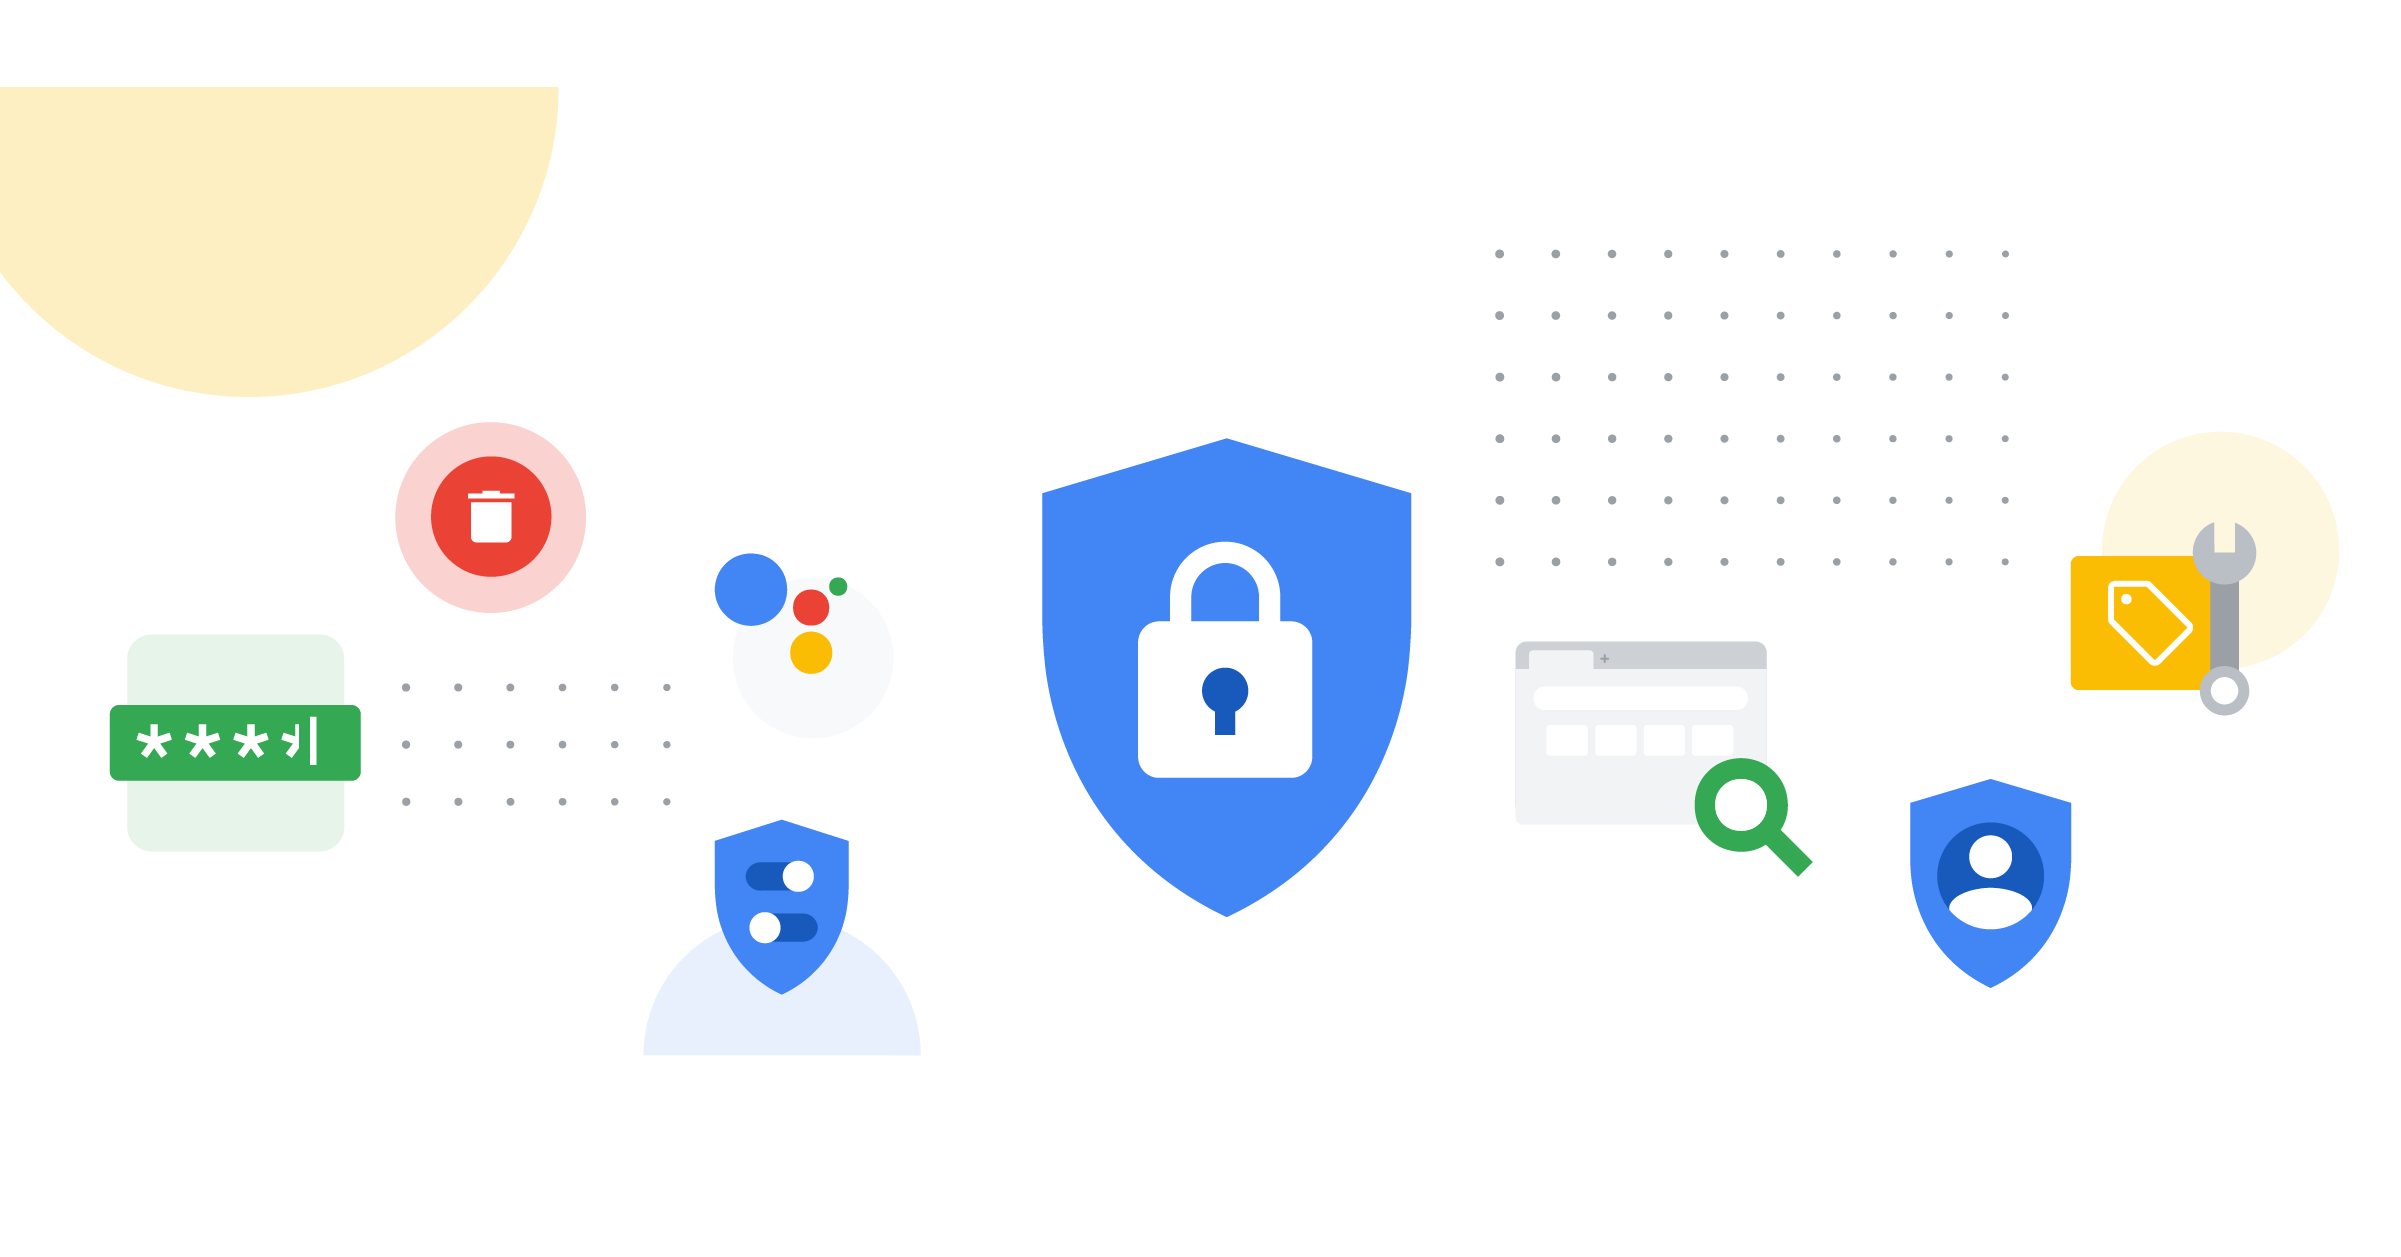 Google actively collaborates with customers, governments, and practitioners to ensure AI security.